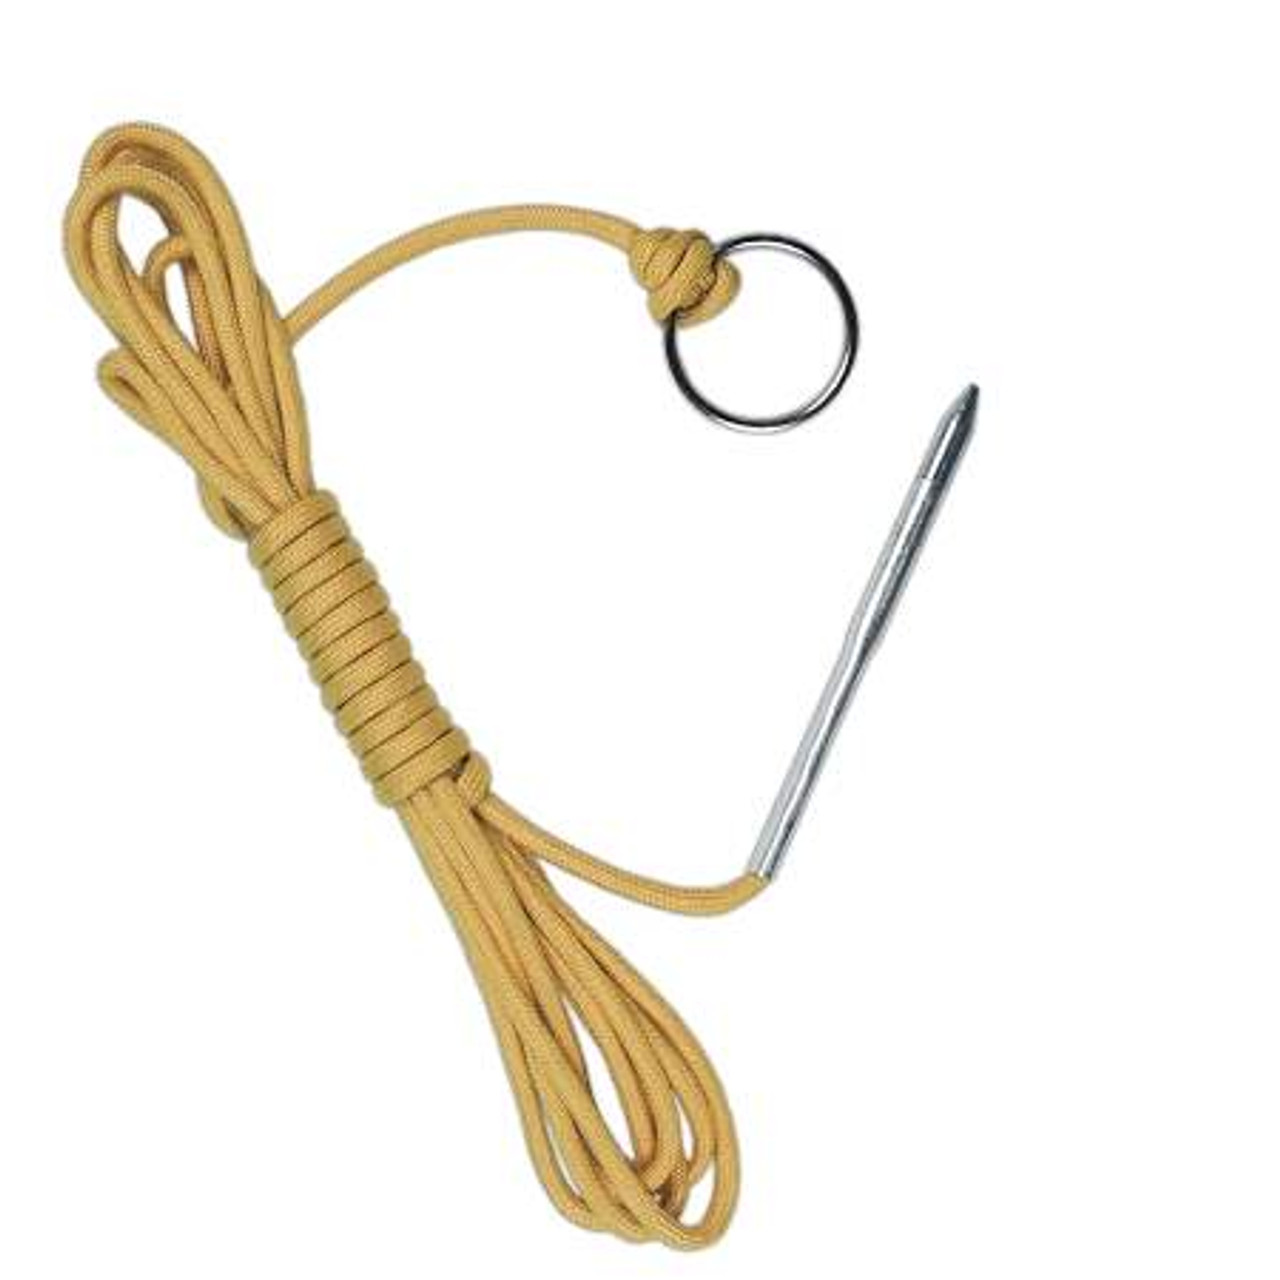 10' Paracord Fishing Stringer - Lure